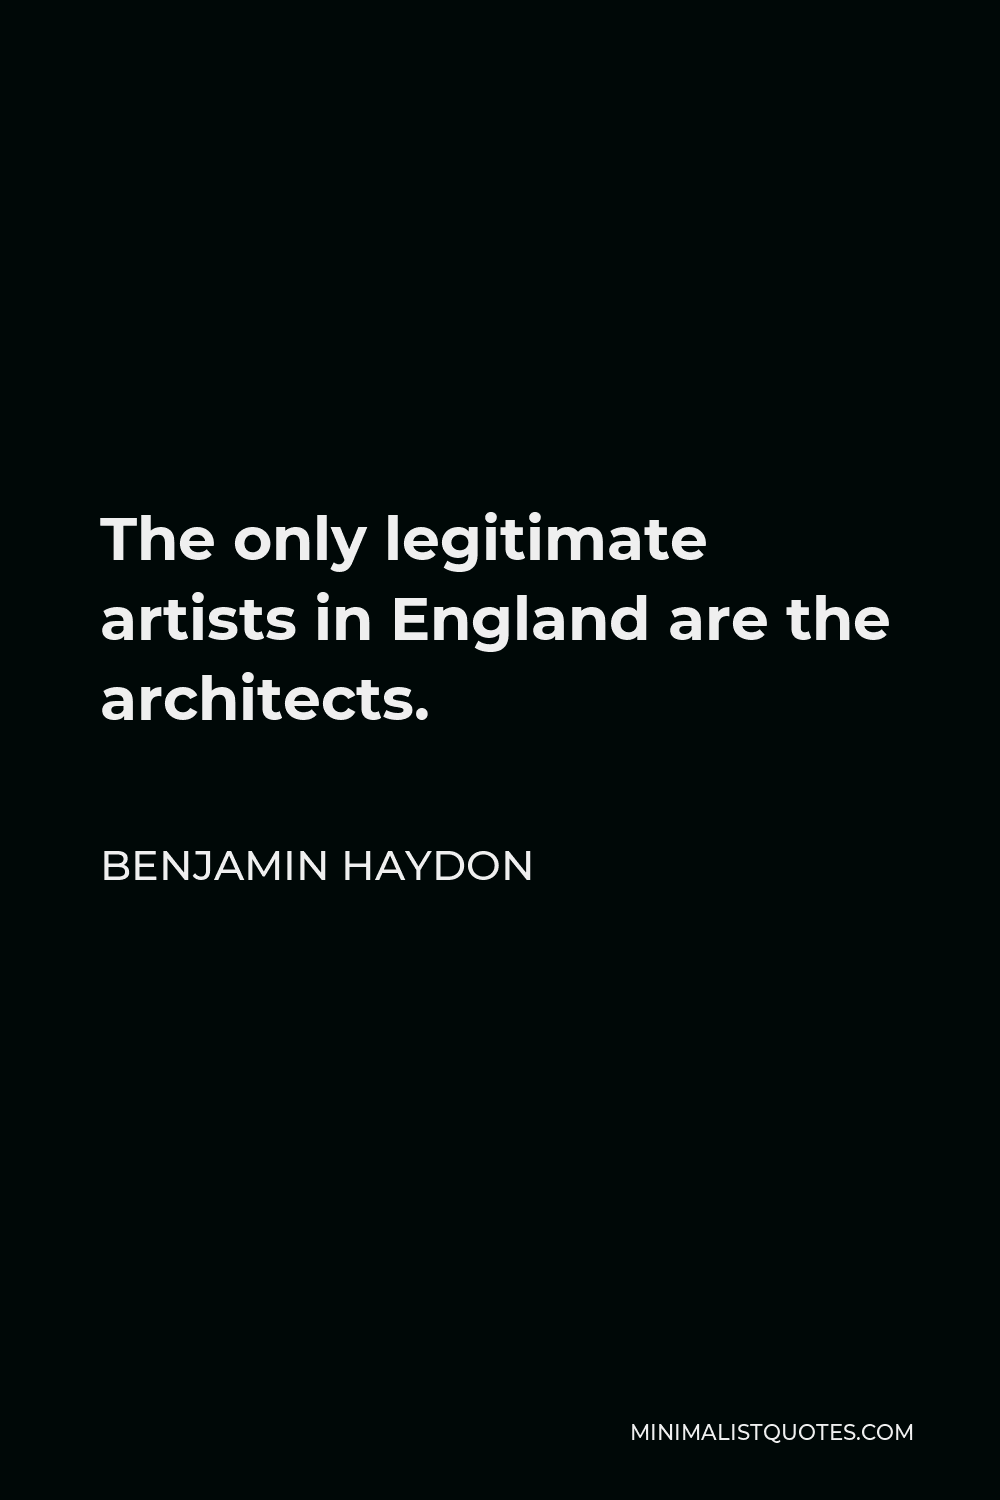 Benjamin Haydon Quote - The only legitimate artists in England are the architects.